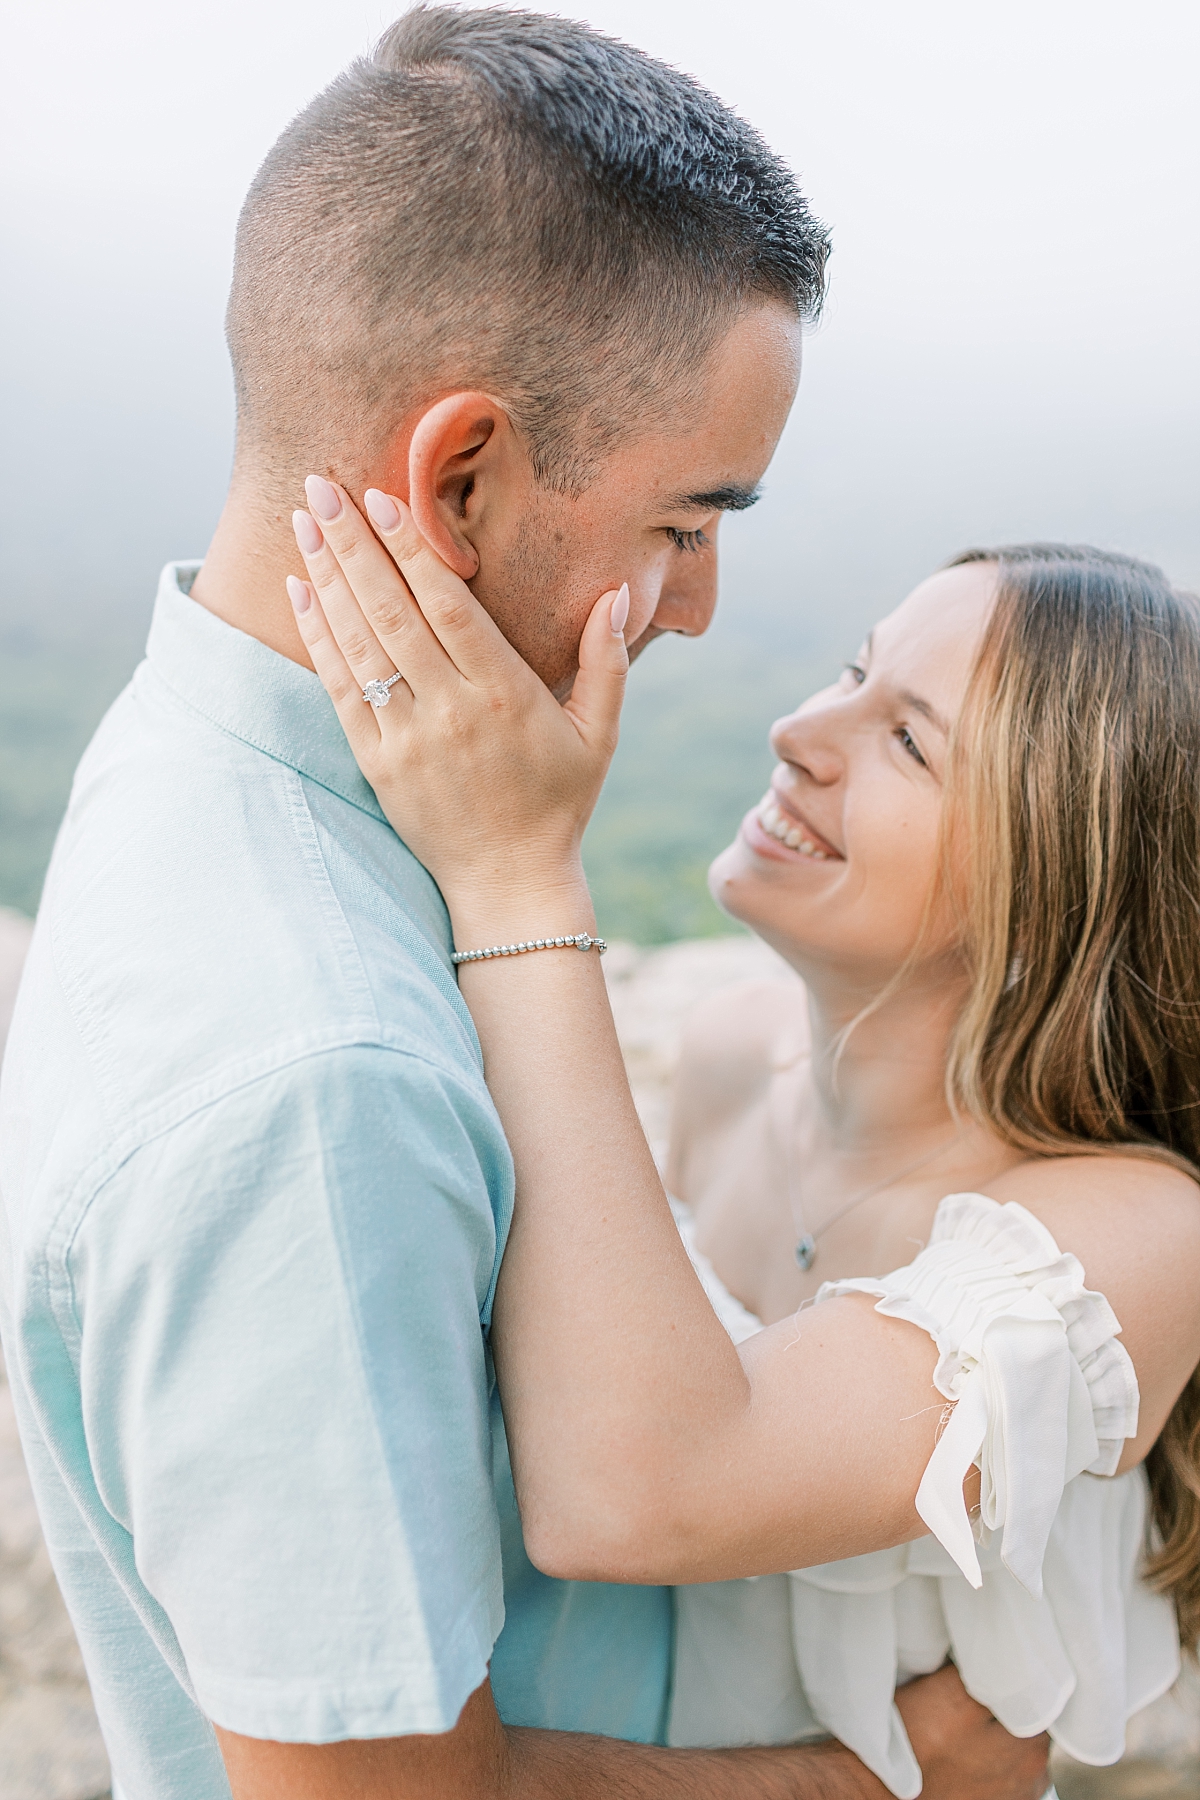 Engagement photo of a couple at Hawk Mountain Sanctuary in PA. The engagement ring is visible